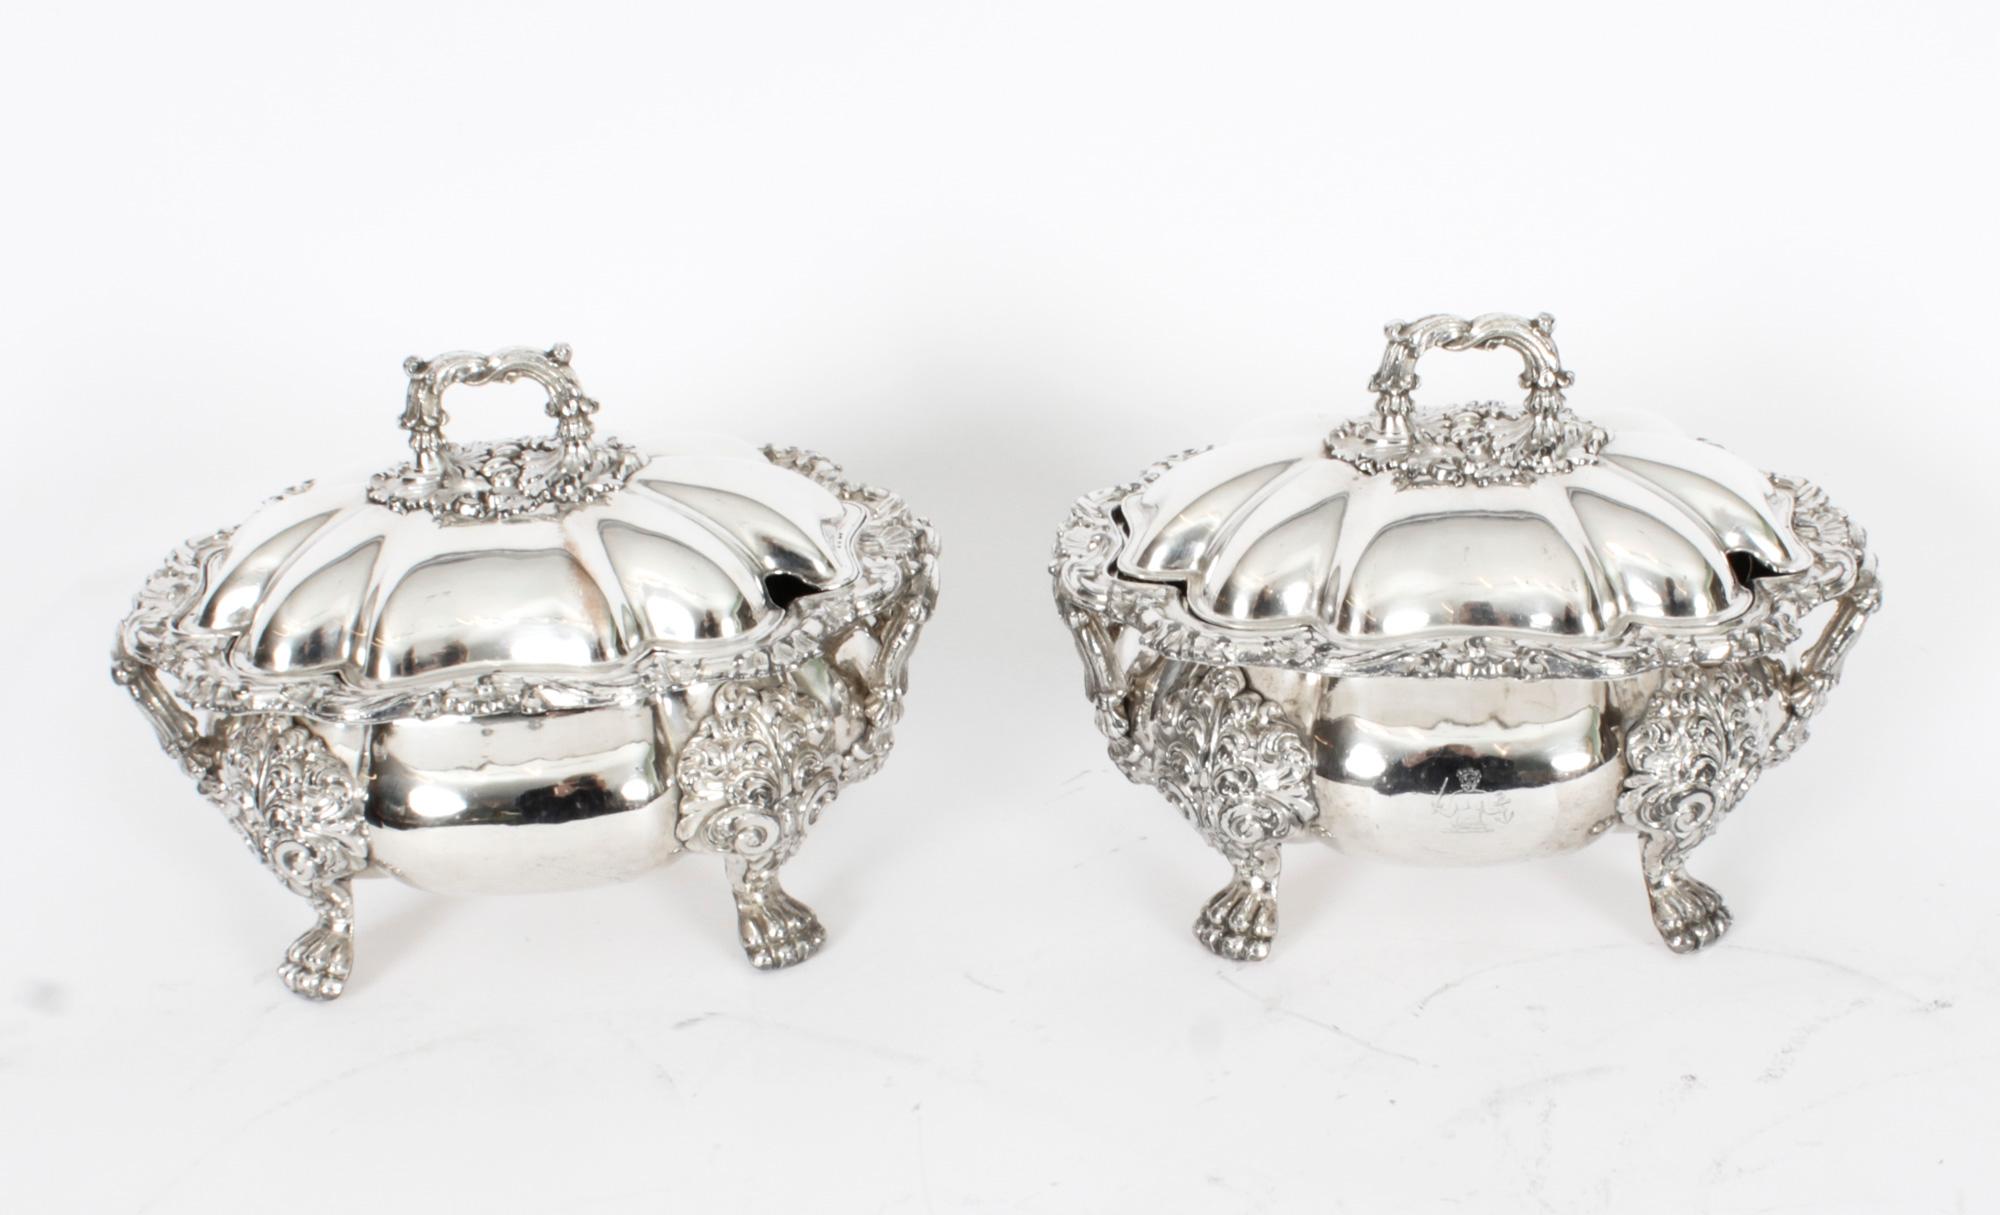 This is an exquisite and rare antique pair of English Old Sheffield Plate, silver plated sauce tureens and covers, Circa 1820 in date.
 
 A truly exquisite pair that would make a fine addition to any antique collection.
 
Condition:
In